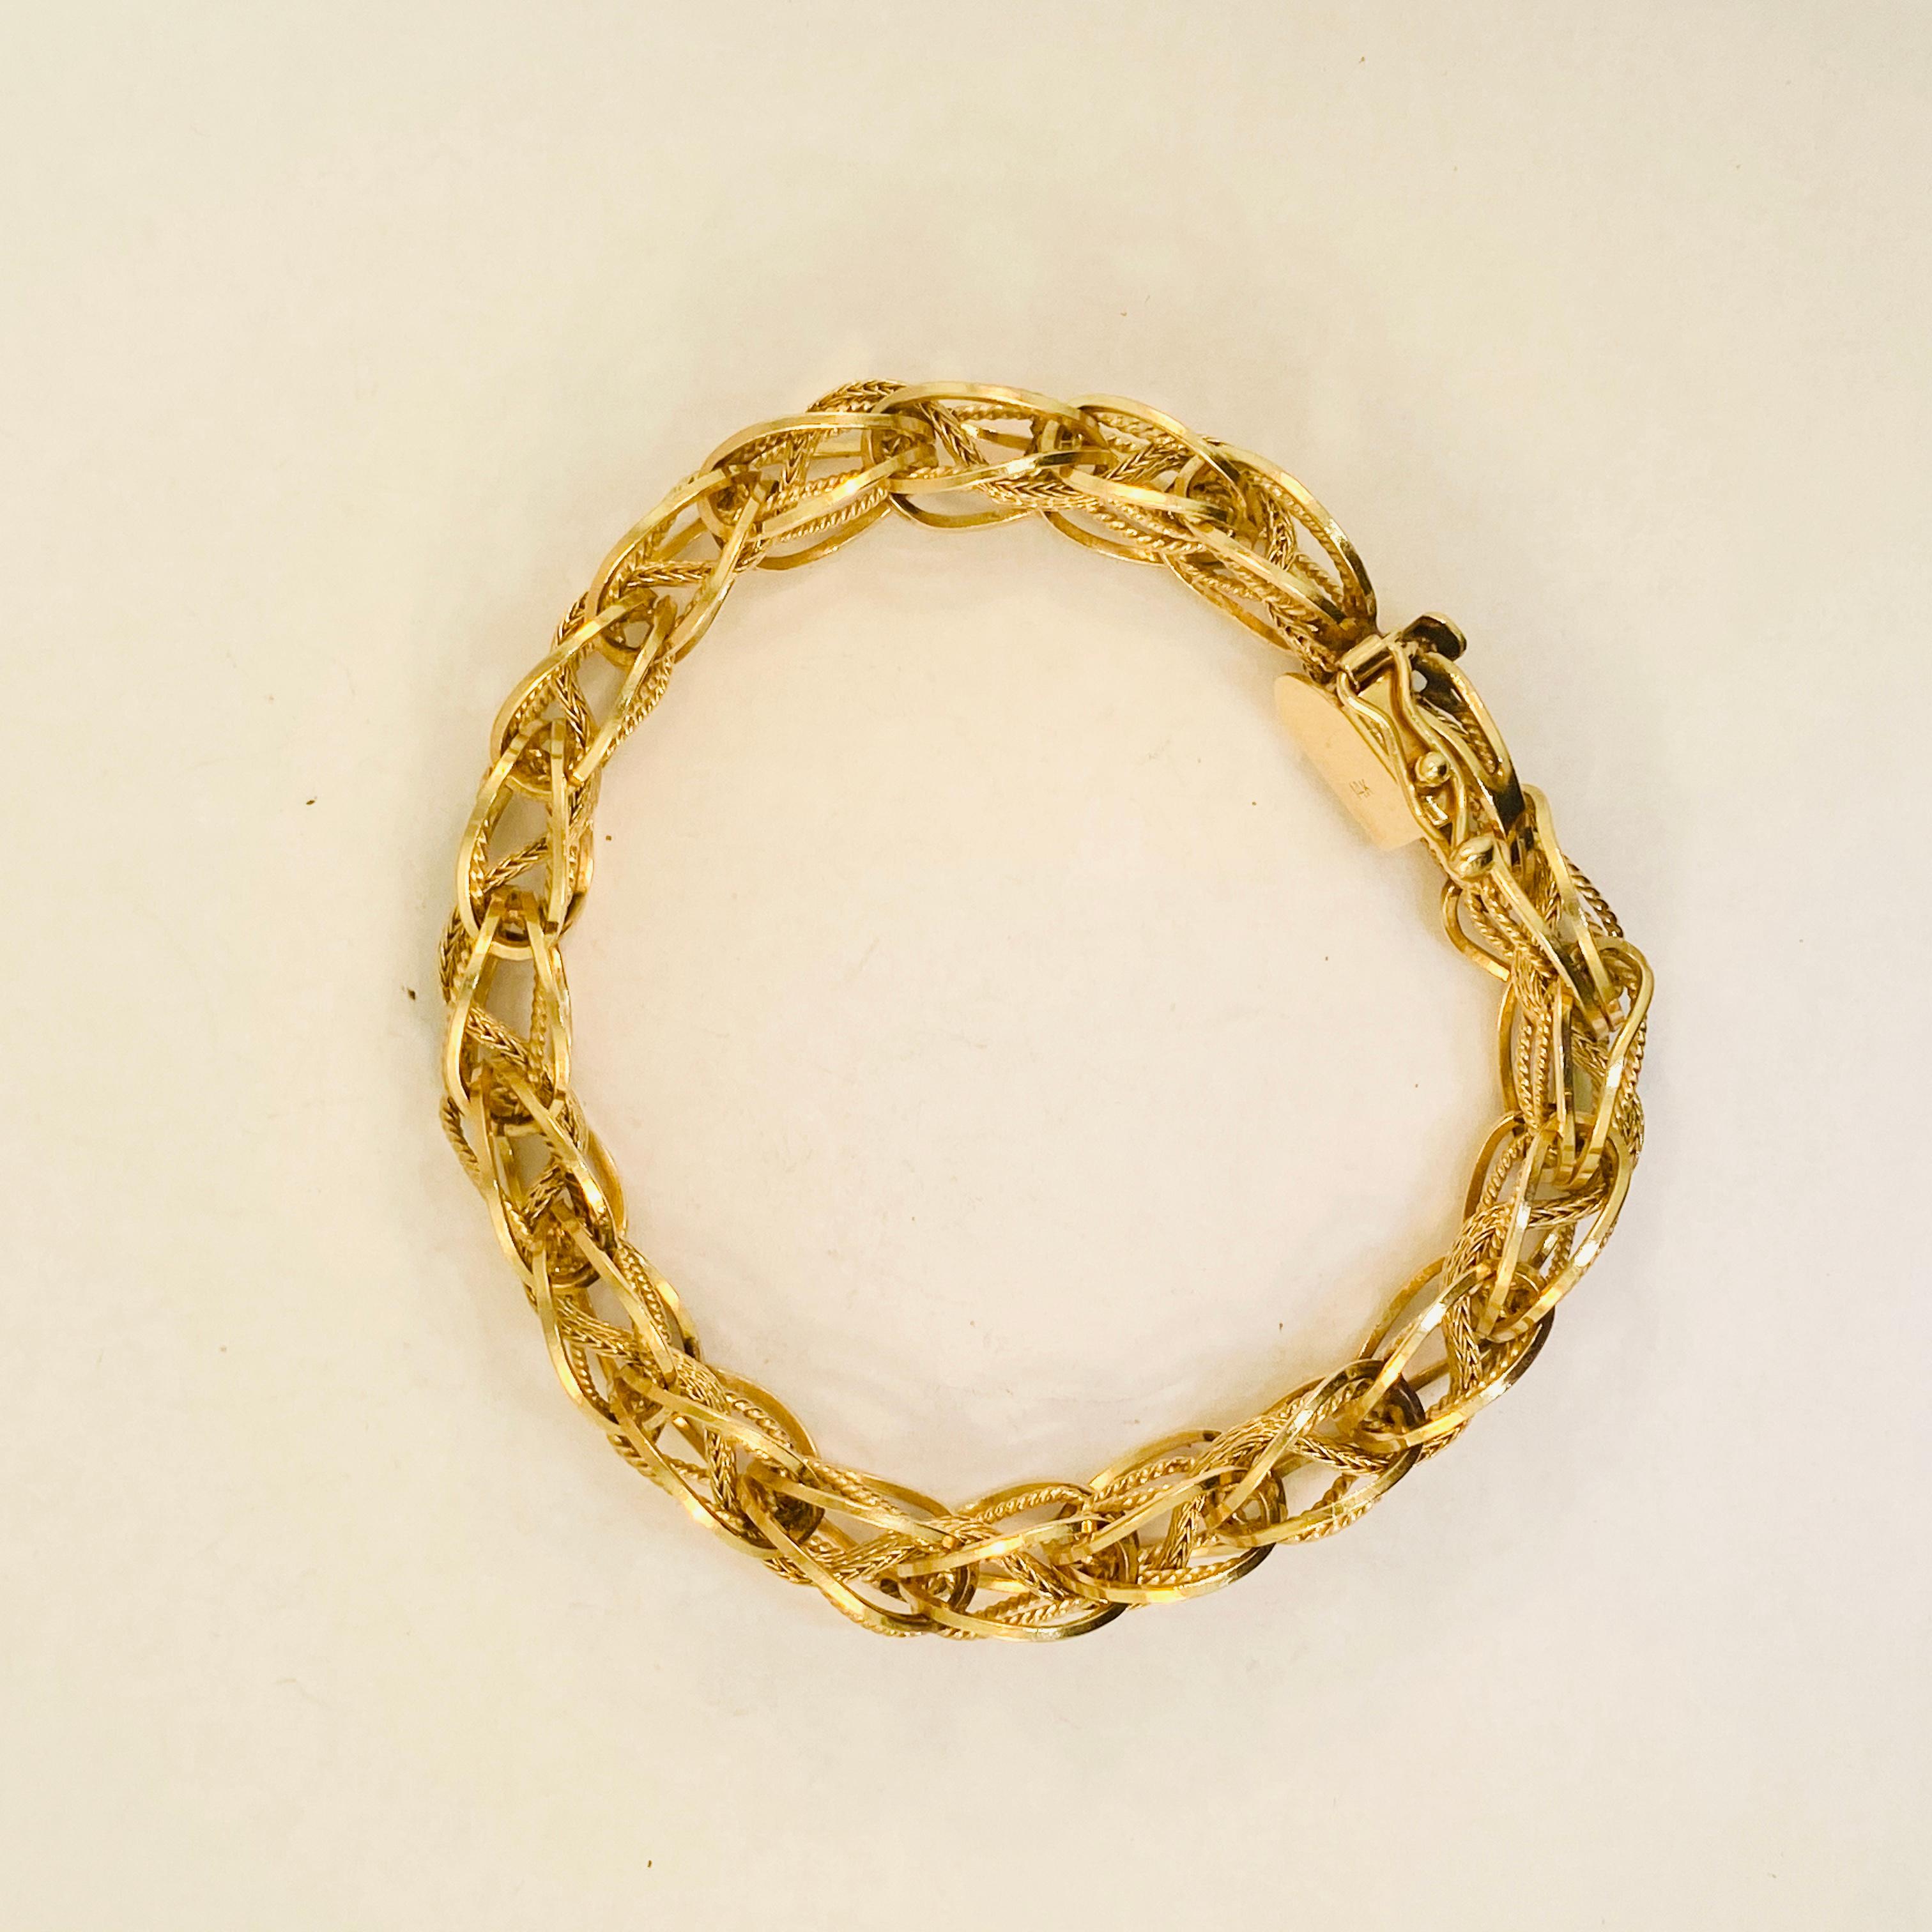 This 14 karat solid yellow gold bracelet is one of a kind and has some of the most intricate chain work I've seen!  The bracelet can be worn by itself or it could be worn as a charm bracelet. This piece is perfect for daily wear or a night out! 

14